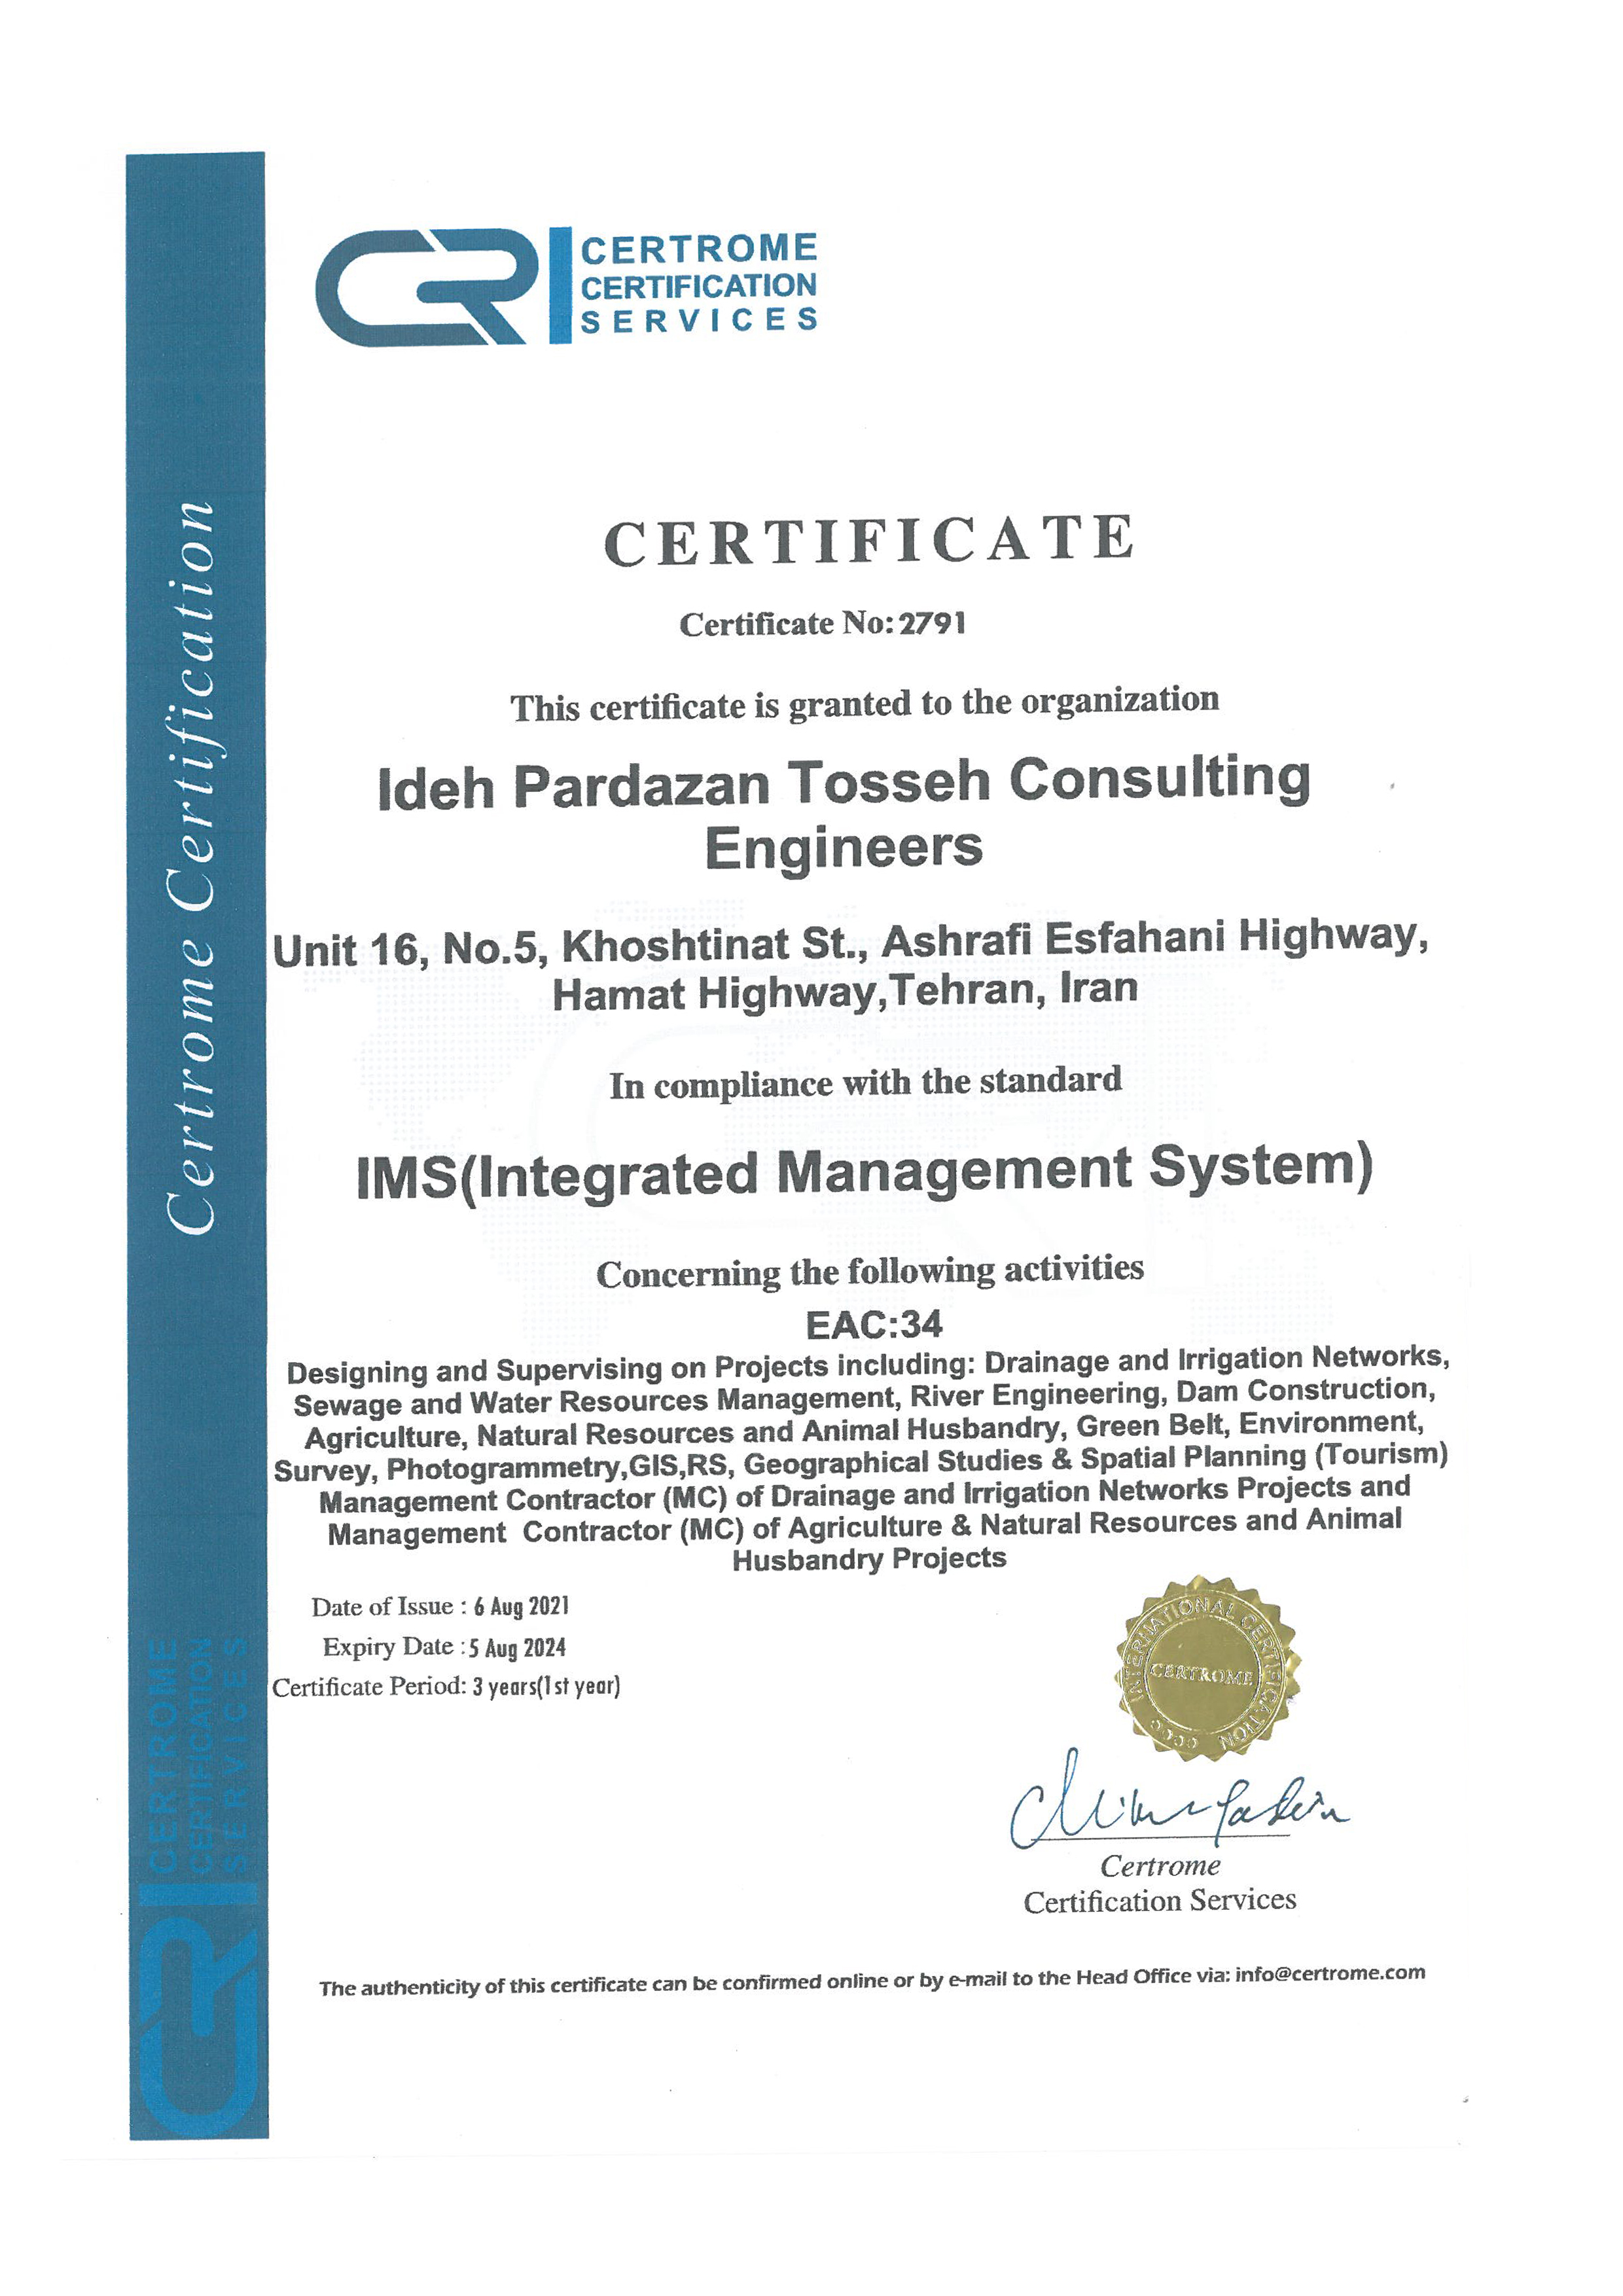 ims(integrated-management-system)